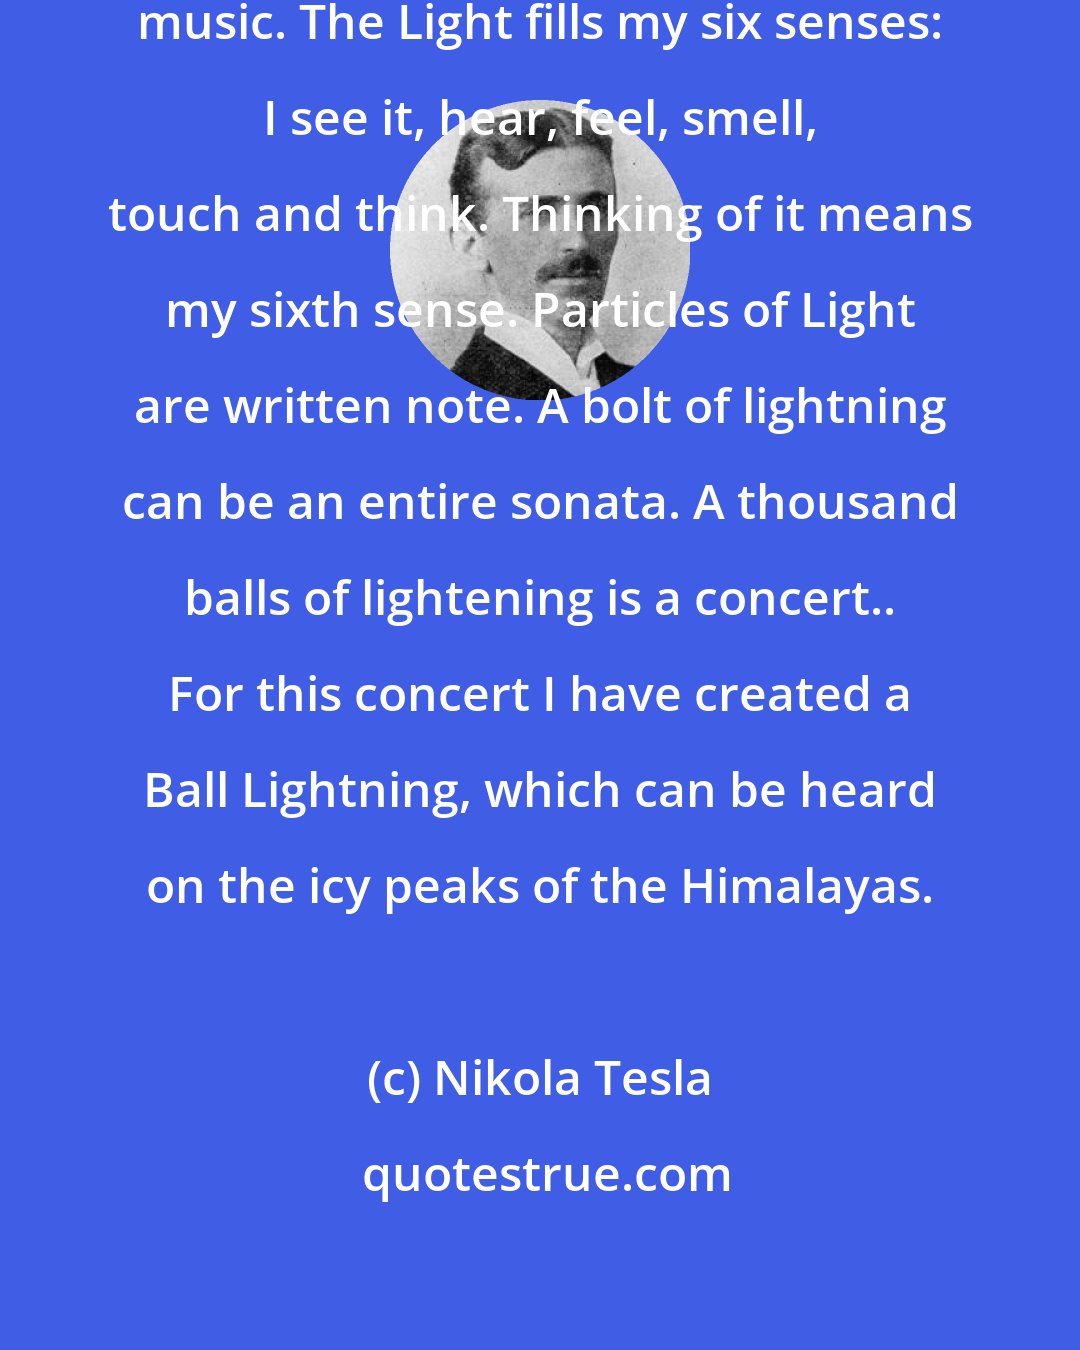 Nikola Tesla: I am part of a light, and it is the music. The Light fills my six senses: I see it, hear, feel, smell, touch and think. Thinking of it means my sixth sense. Particles of Light are written note. A bolt of lightning can be an entire sonata. A thousand balls of lightening is a concert.. For this concert I have created a Ball Lightning, which can be heard on the icy peaks of the Himalayas.